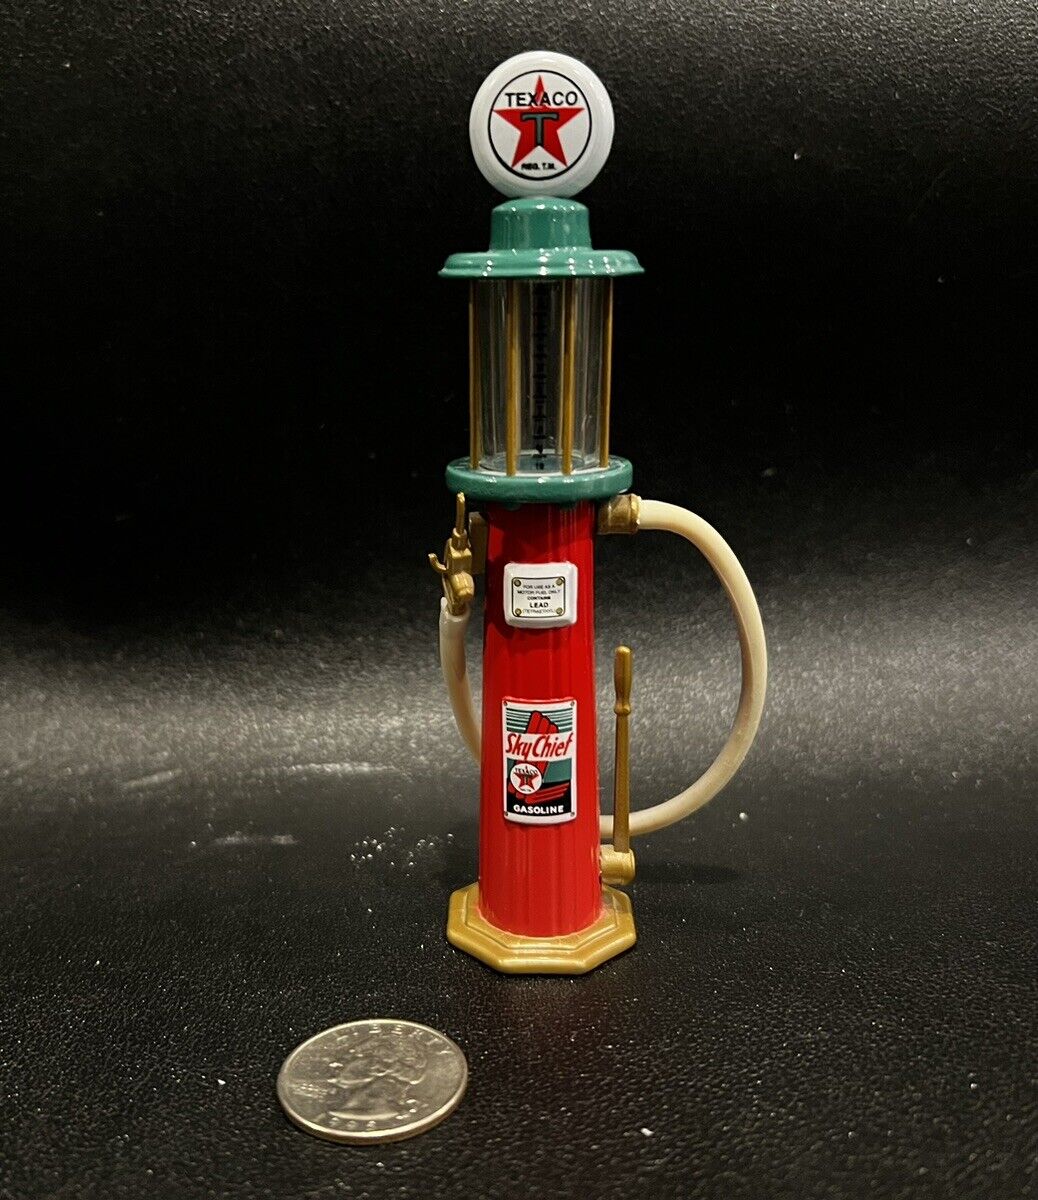 GEARBOX - TEXACO SKY CHIEF GASOLINE Collectible gas pump - 5” Height